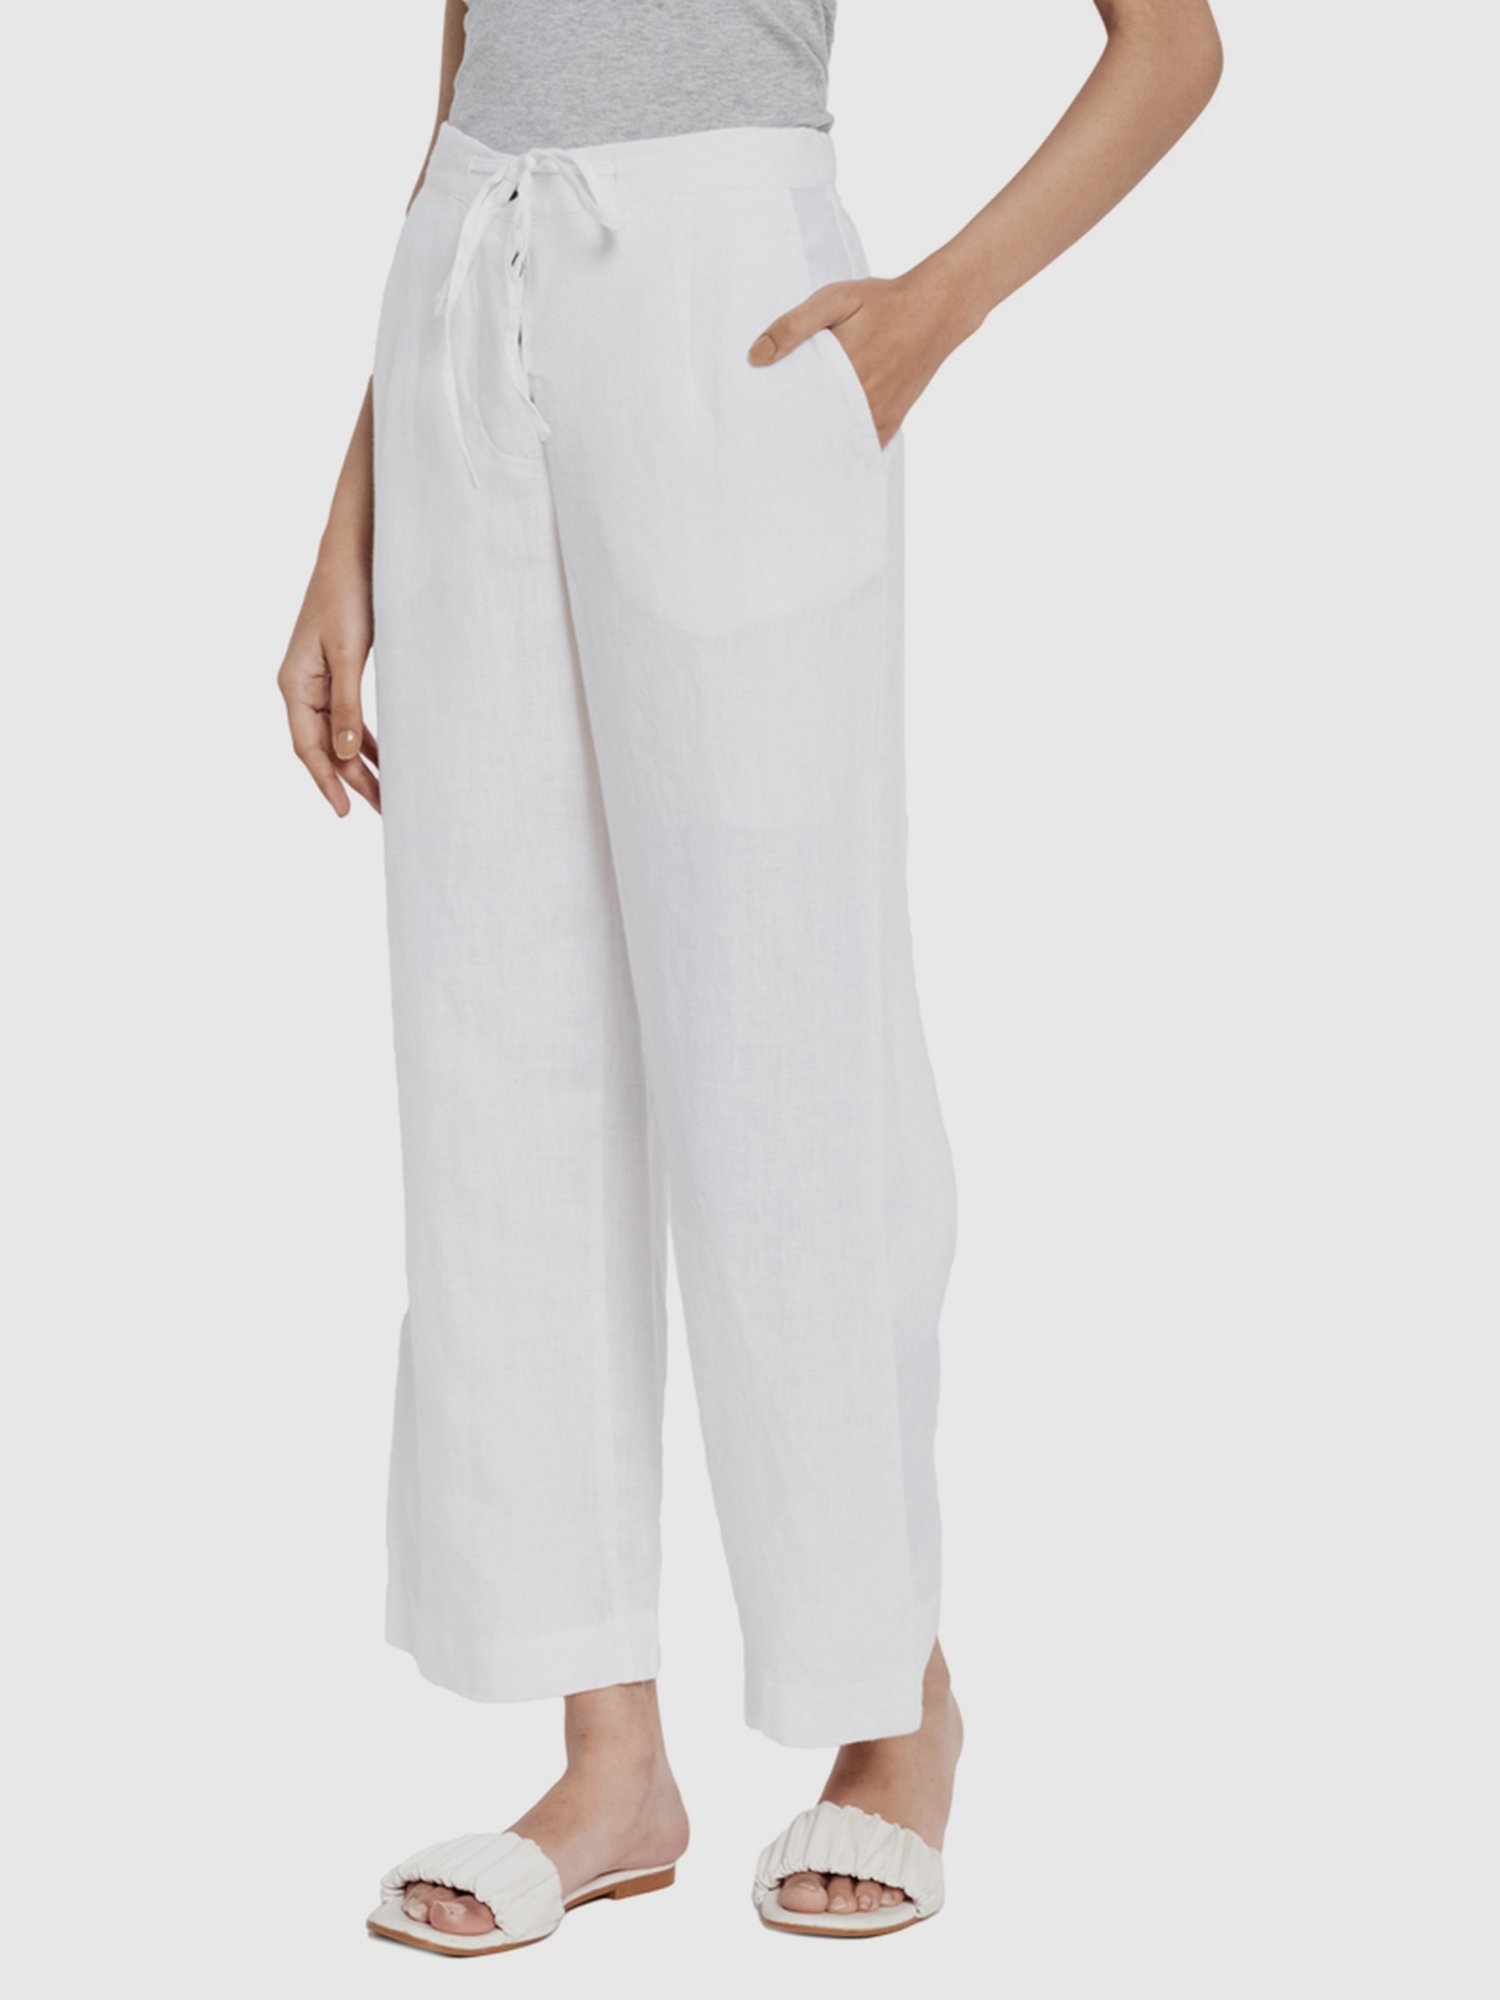 Lacy White Solid Palazzo Pants  MISSPRINT